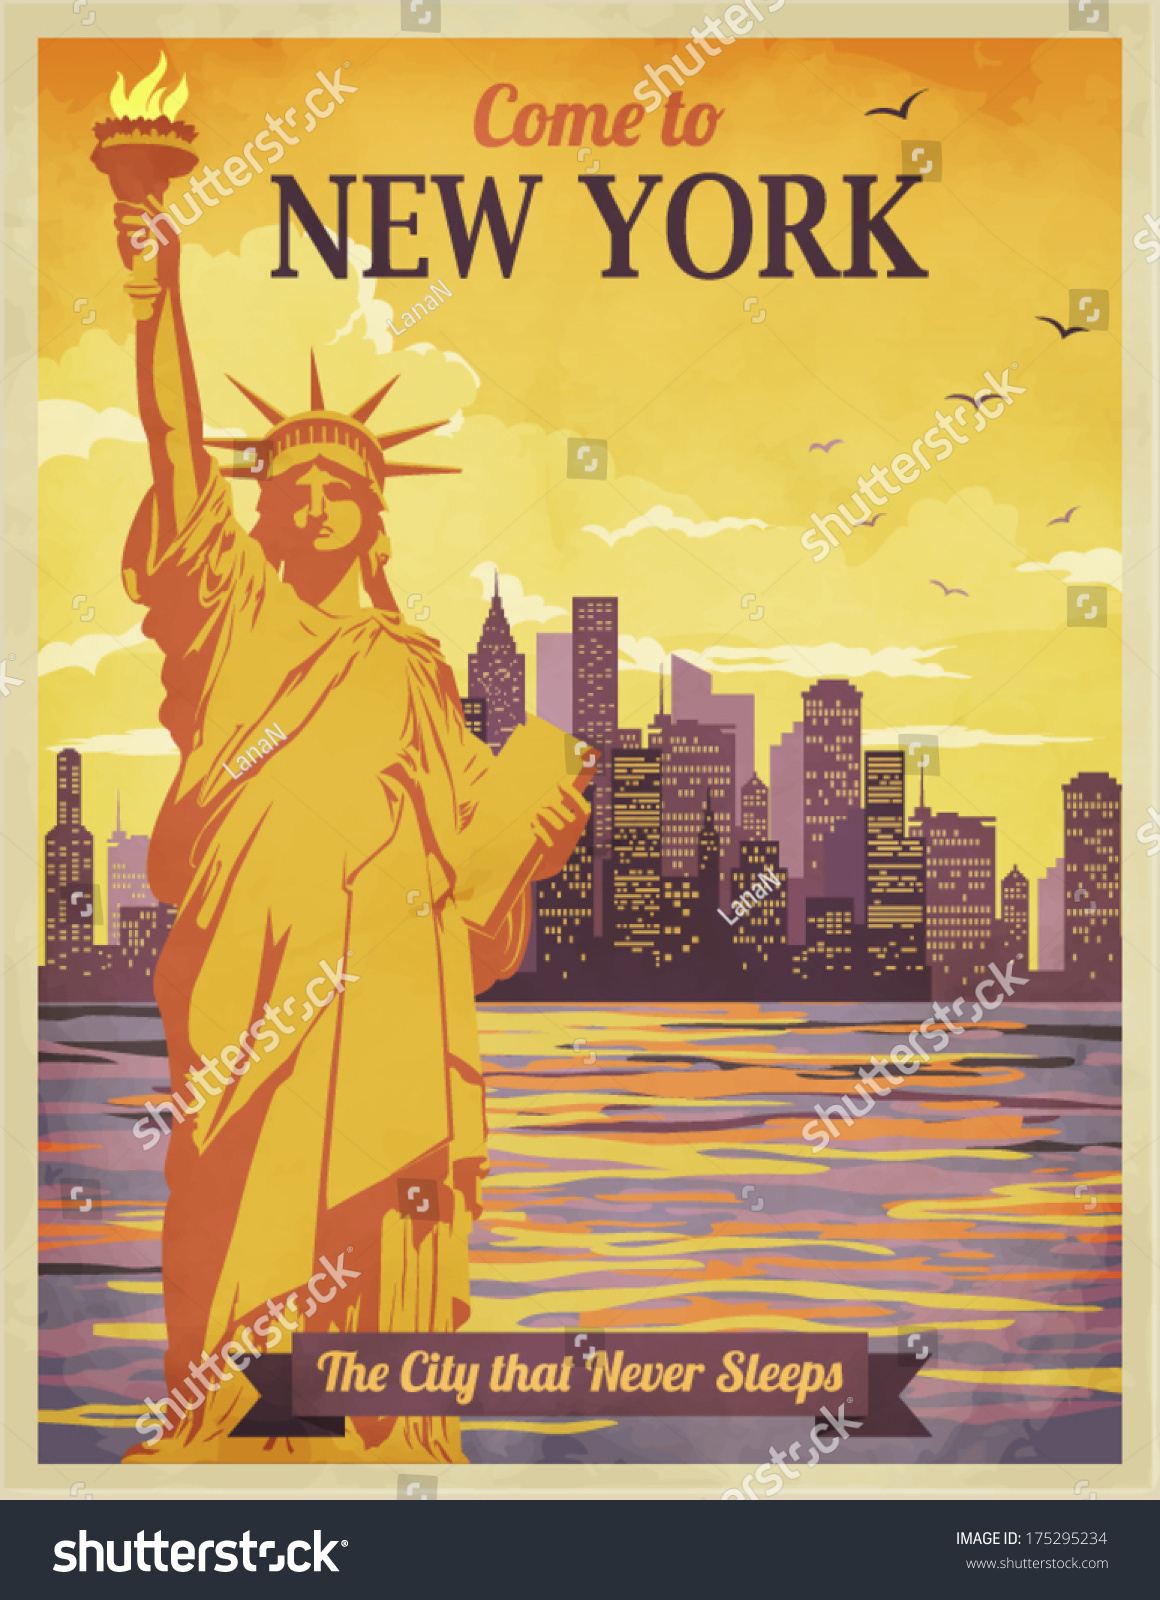 TX239 Vintage 1950/'s New York Statue of Liberty Travel Poster A1//A2//A3//A4